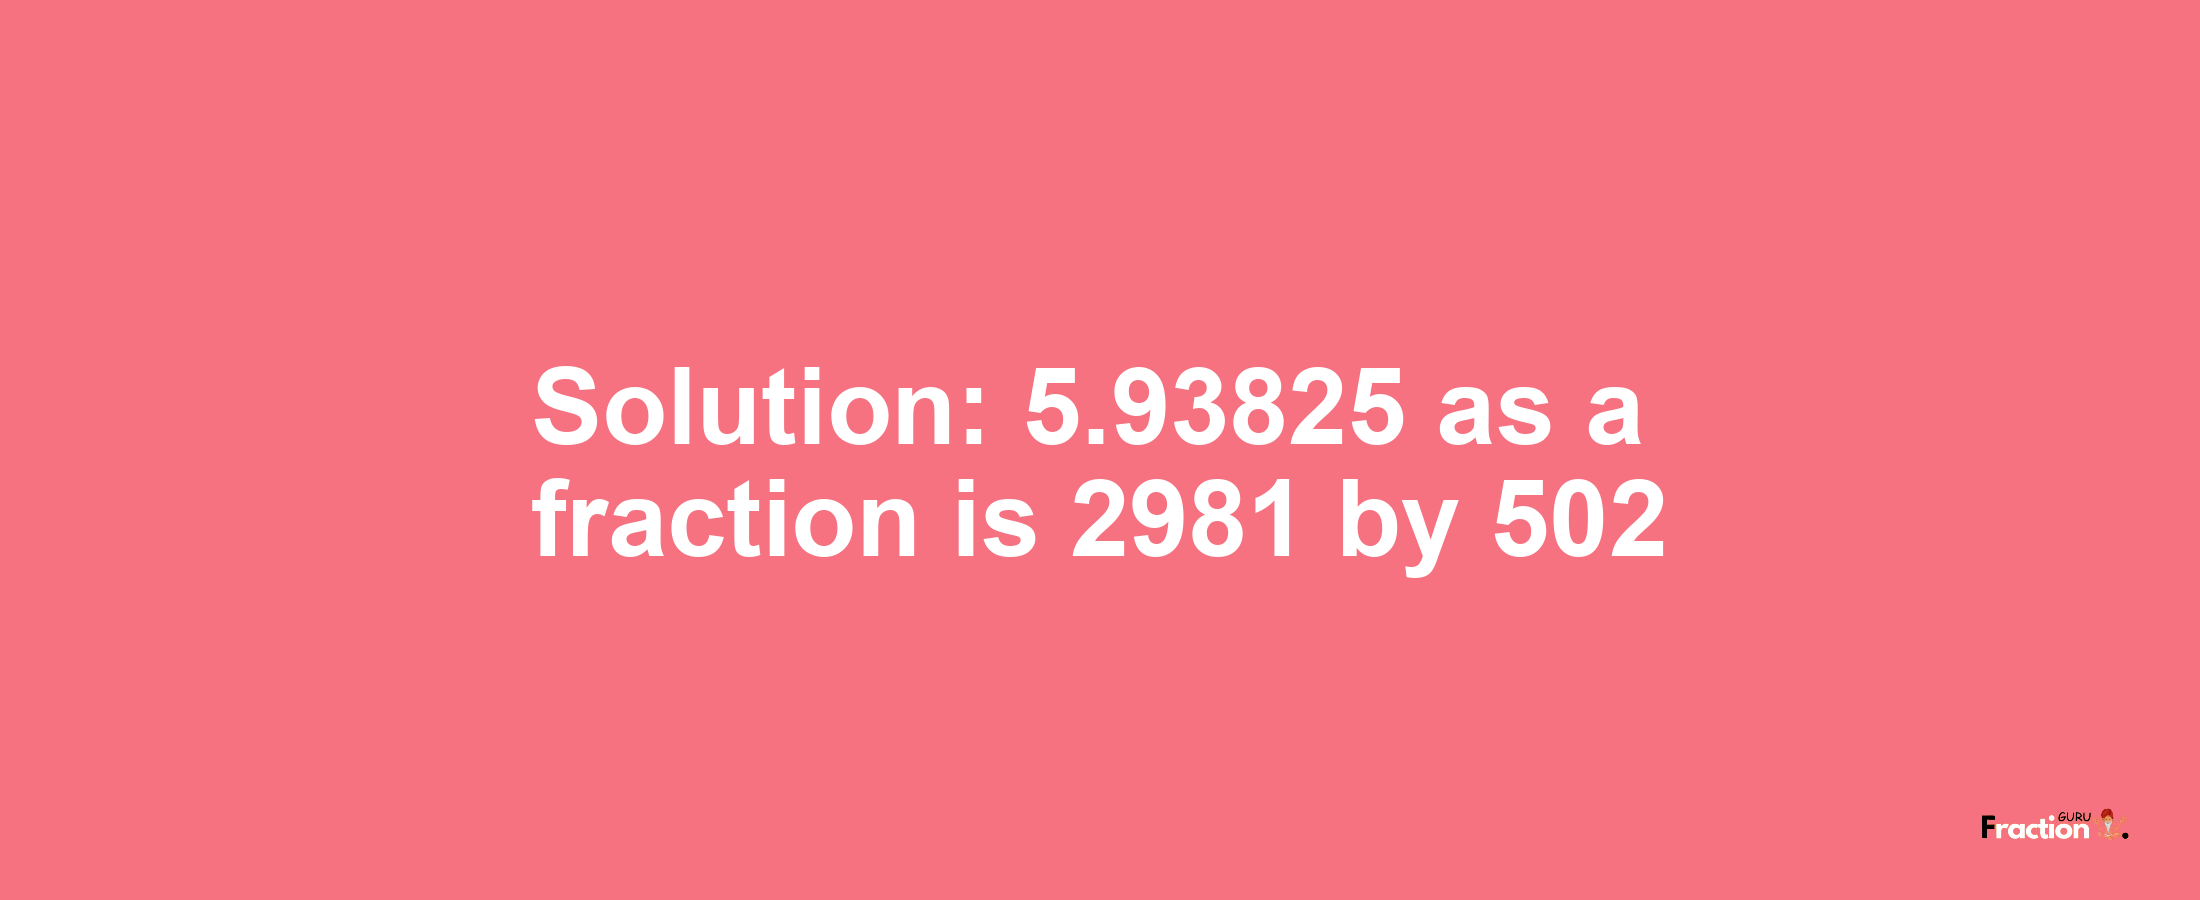 Solution:5.93825 as a fraction is 2981/502